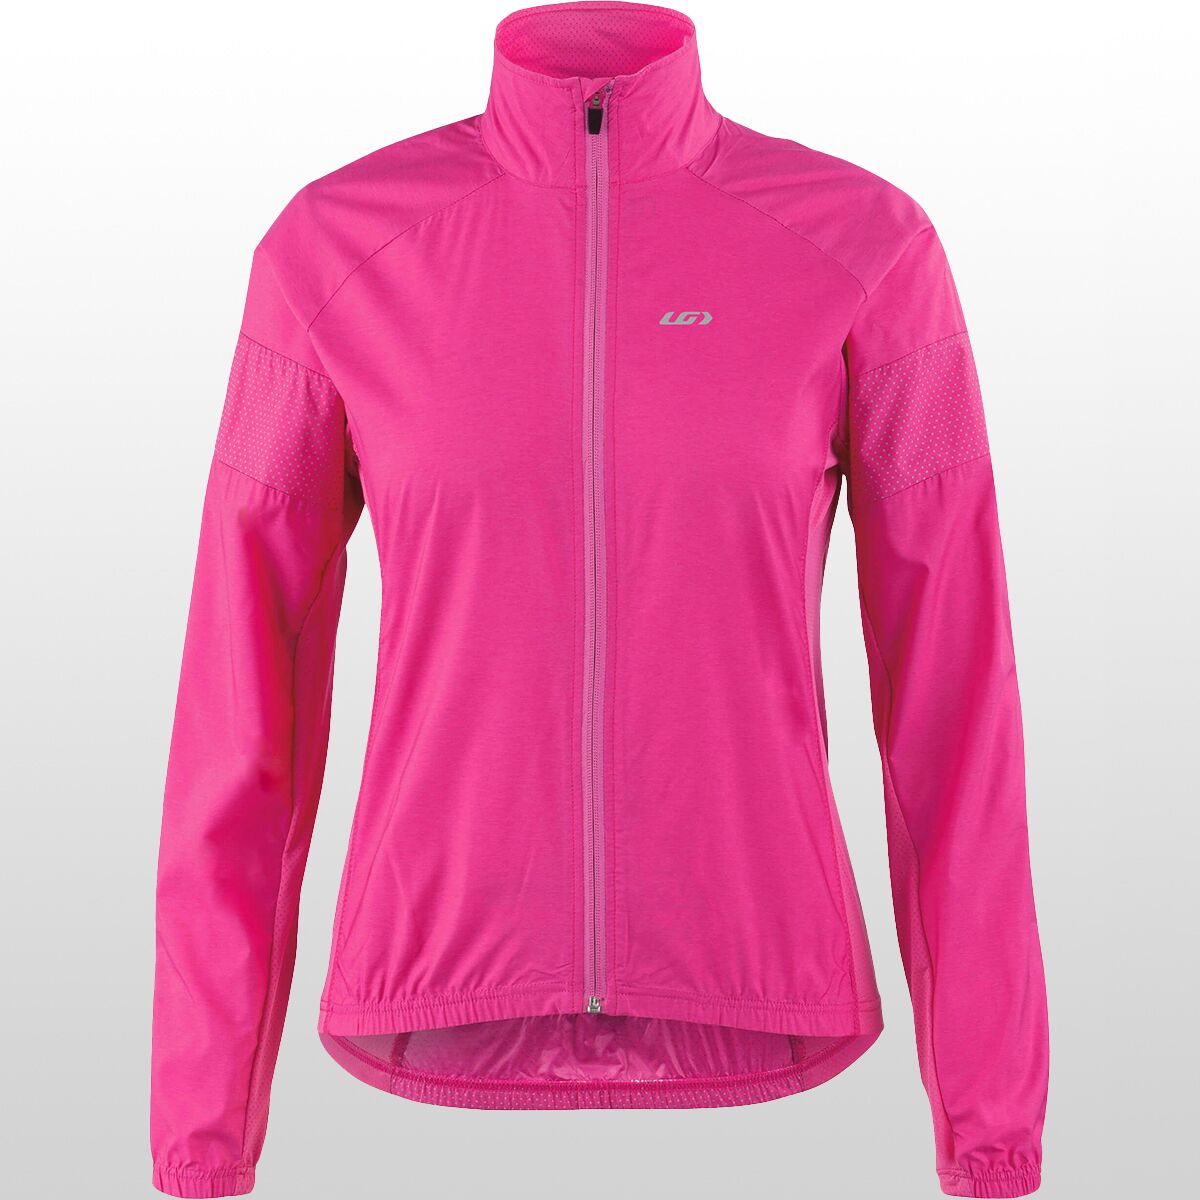  Terry Mistral Packable Womens Running Cycling Jacket